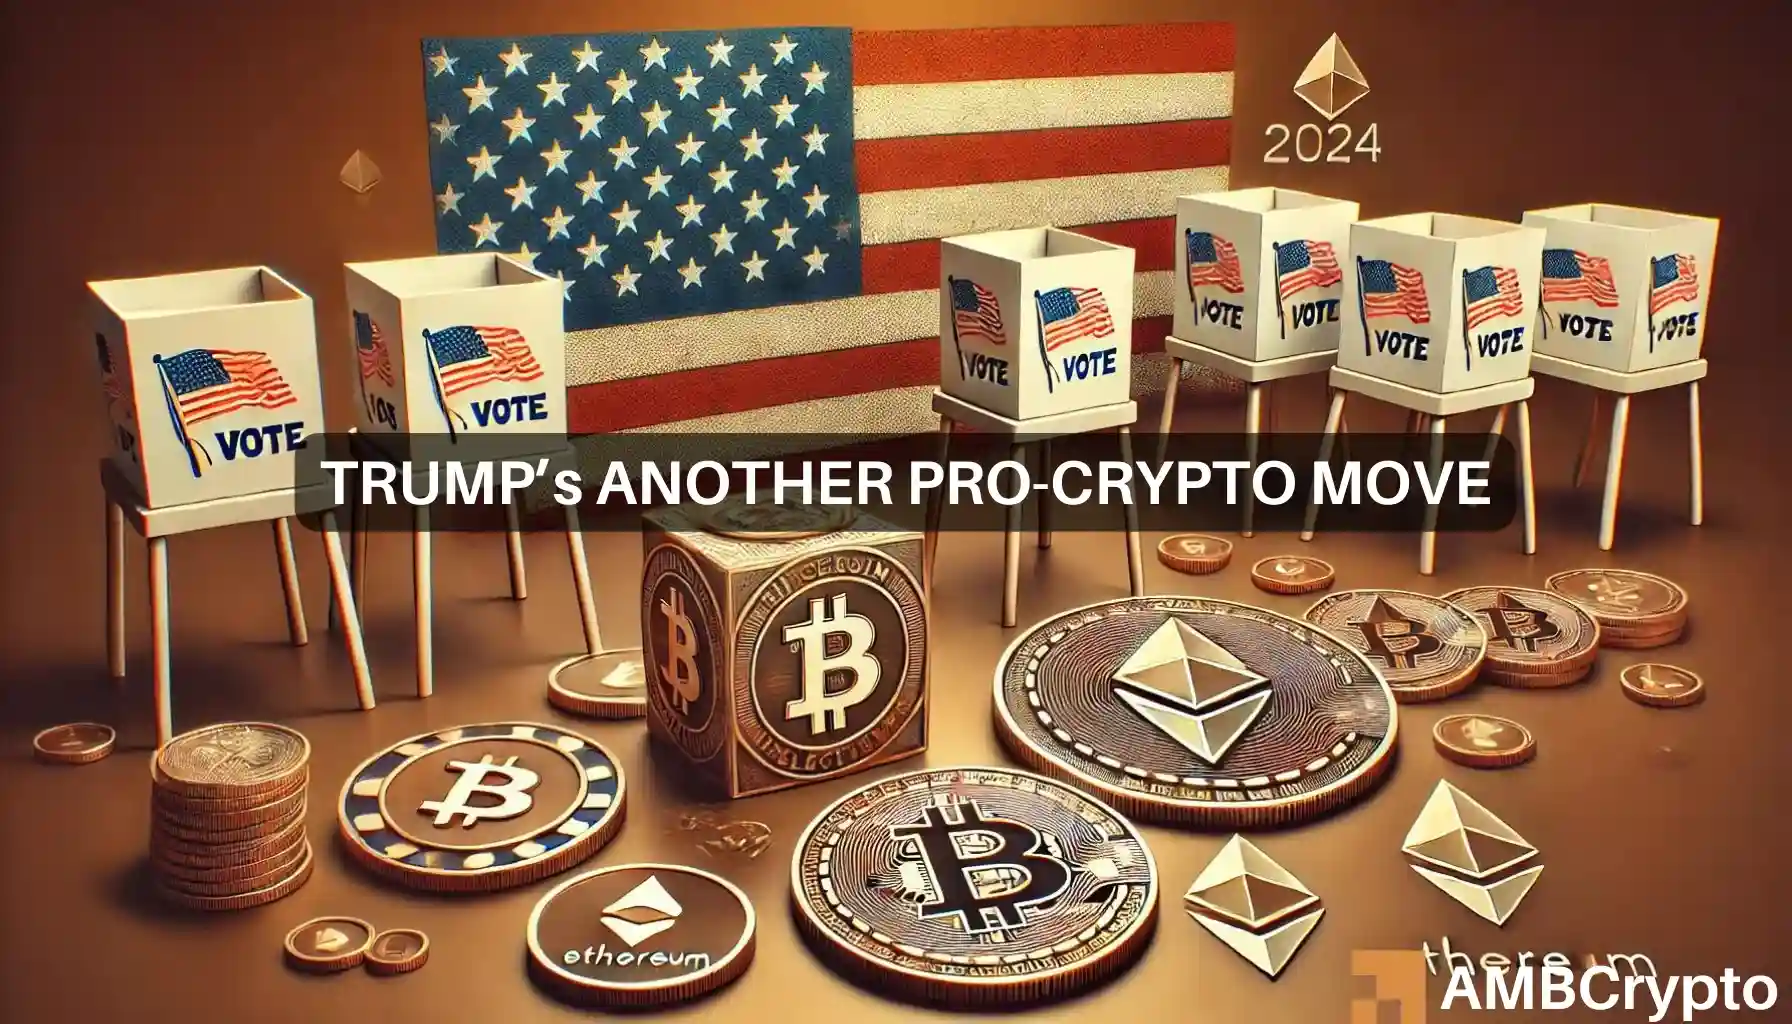 Donald Trump chooses J.D. Vance as VP candidate - Crypto community rejoices